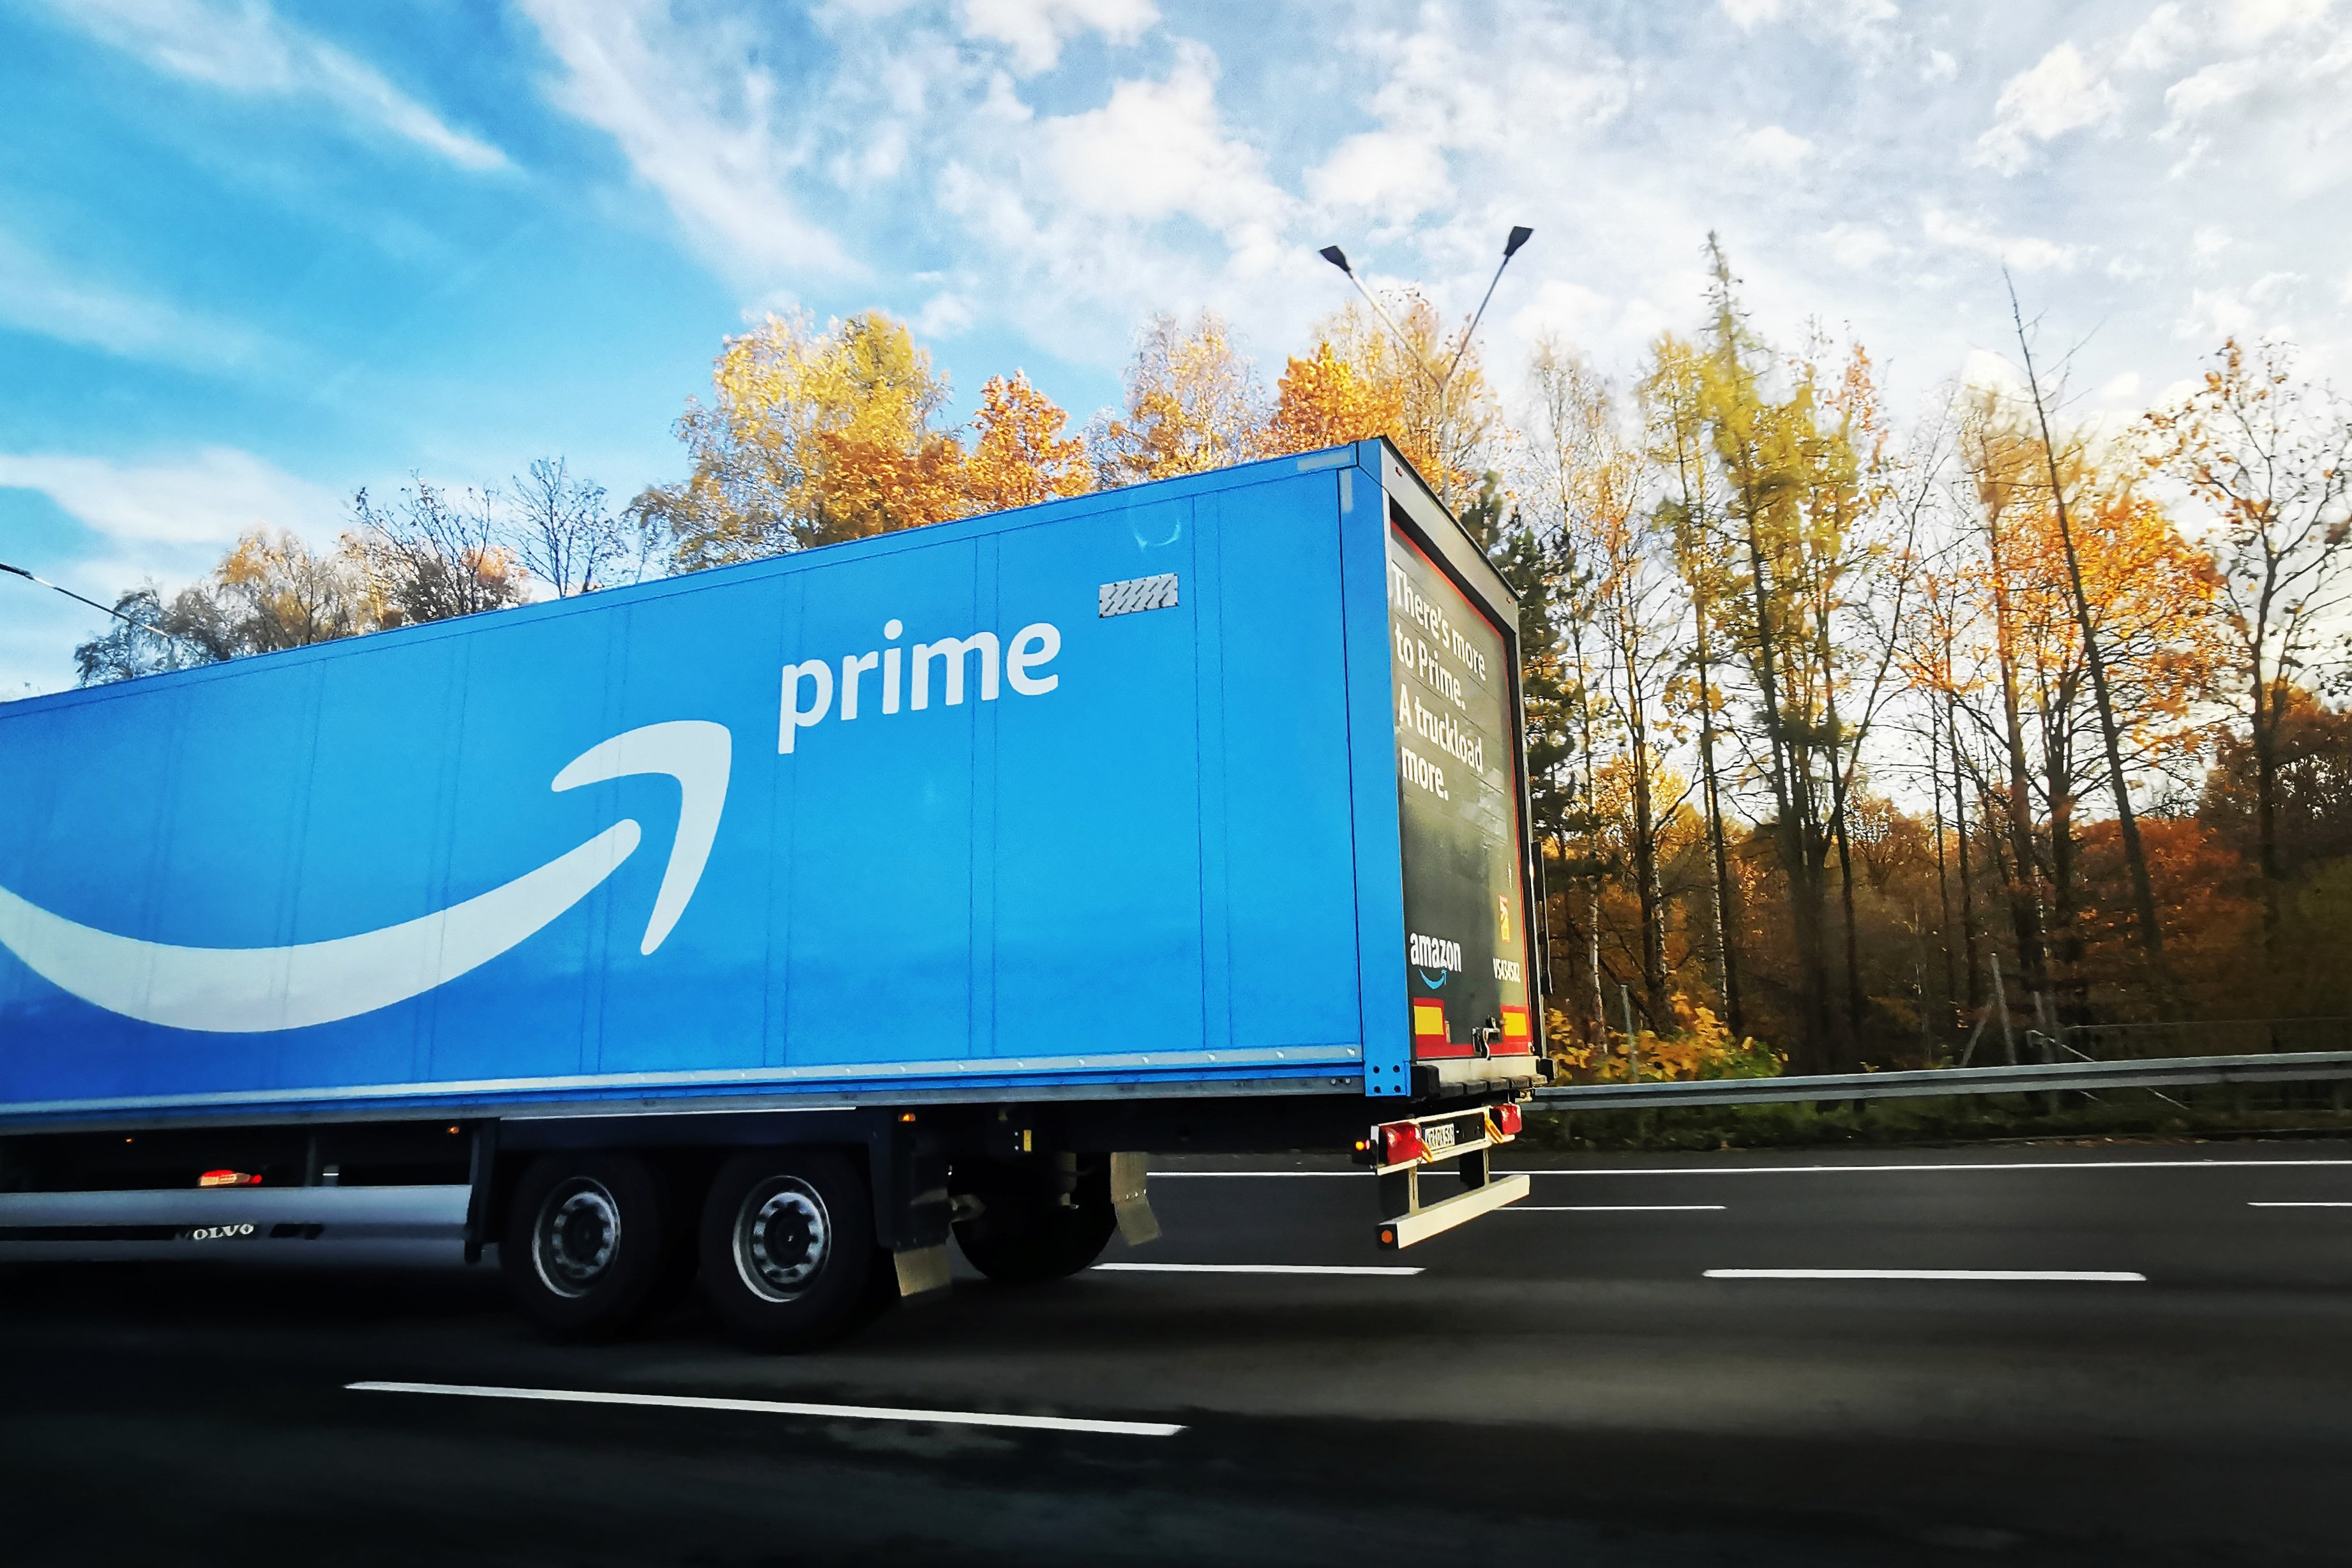 Last Day to Get Amazon Prime Before the Price Increase